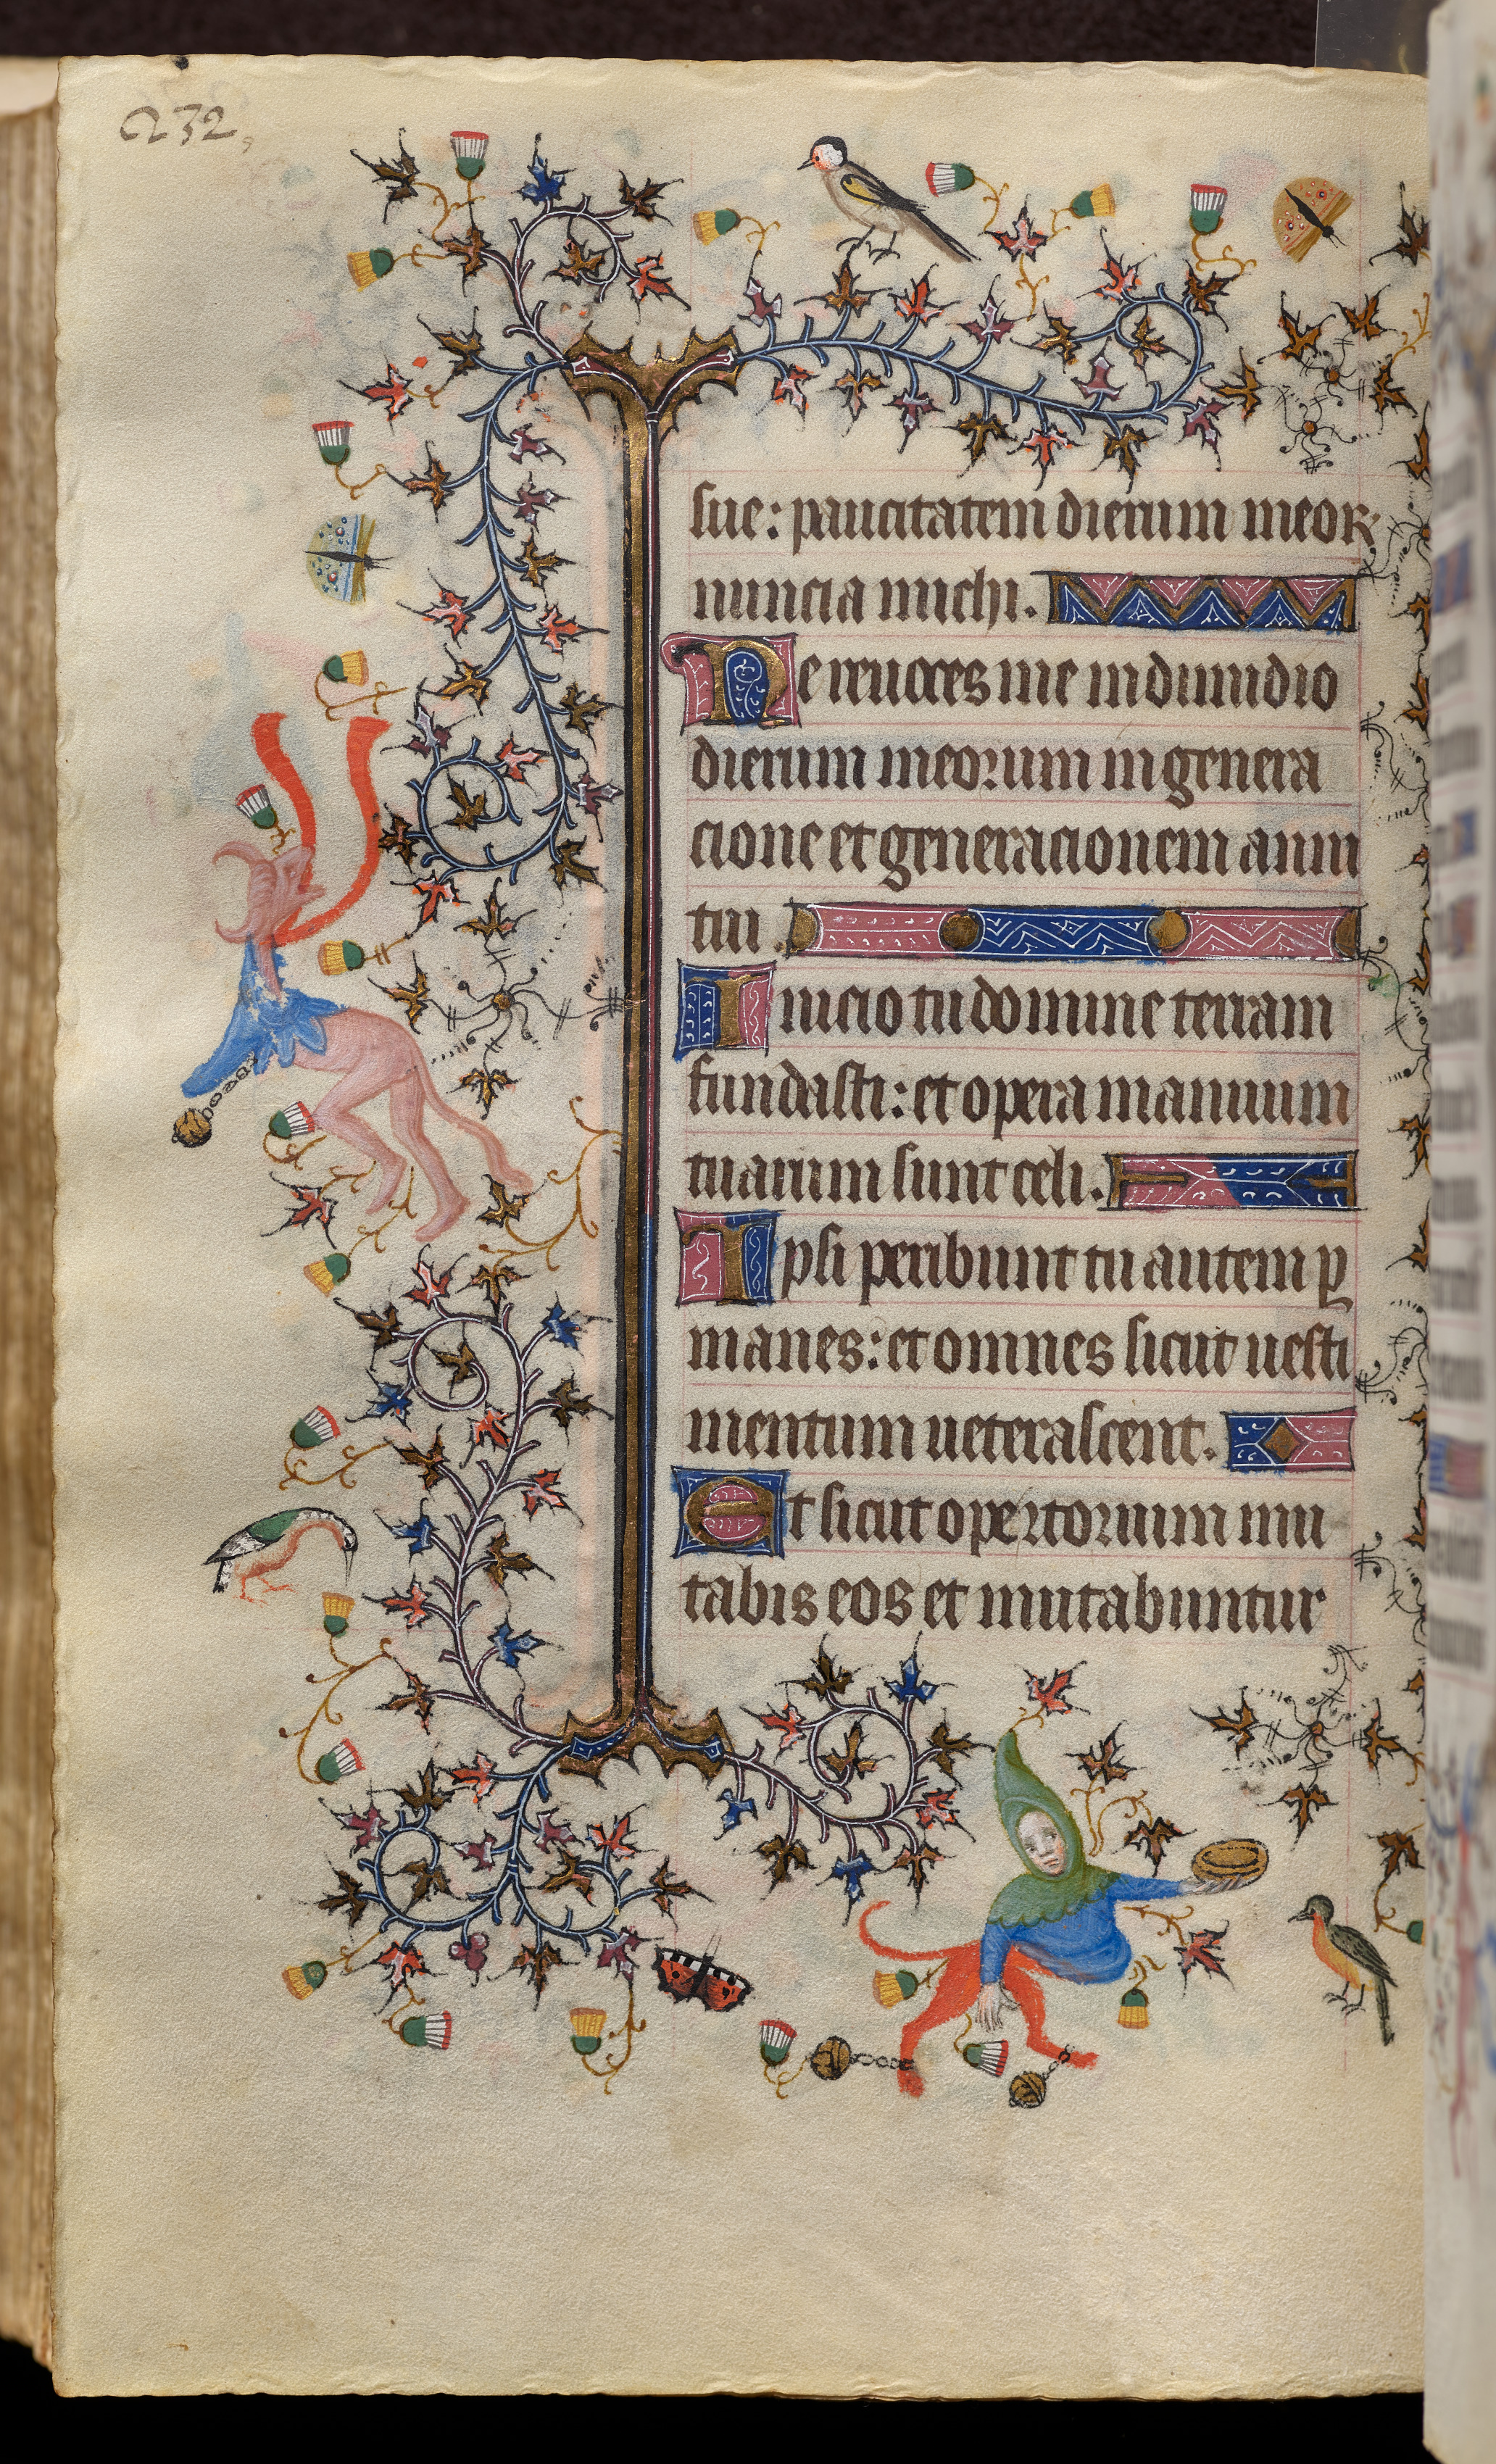 Hours of Charles the Noble, King of Navarre (1361-1425): fol. 116v, Text